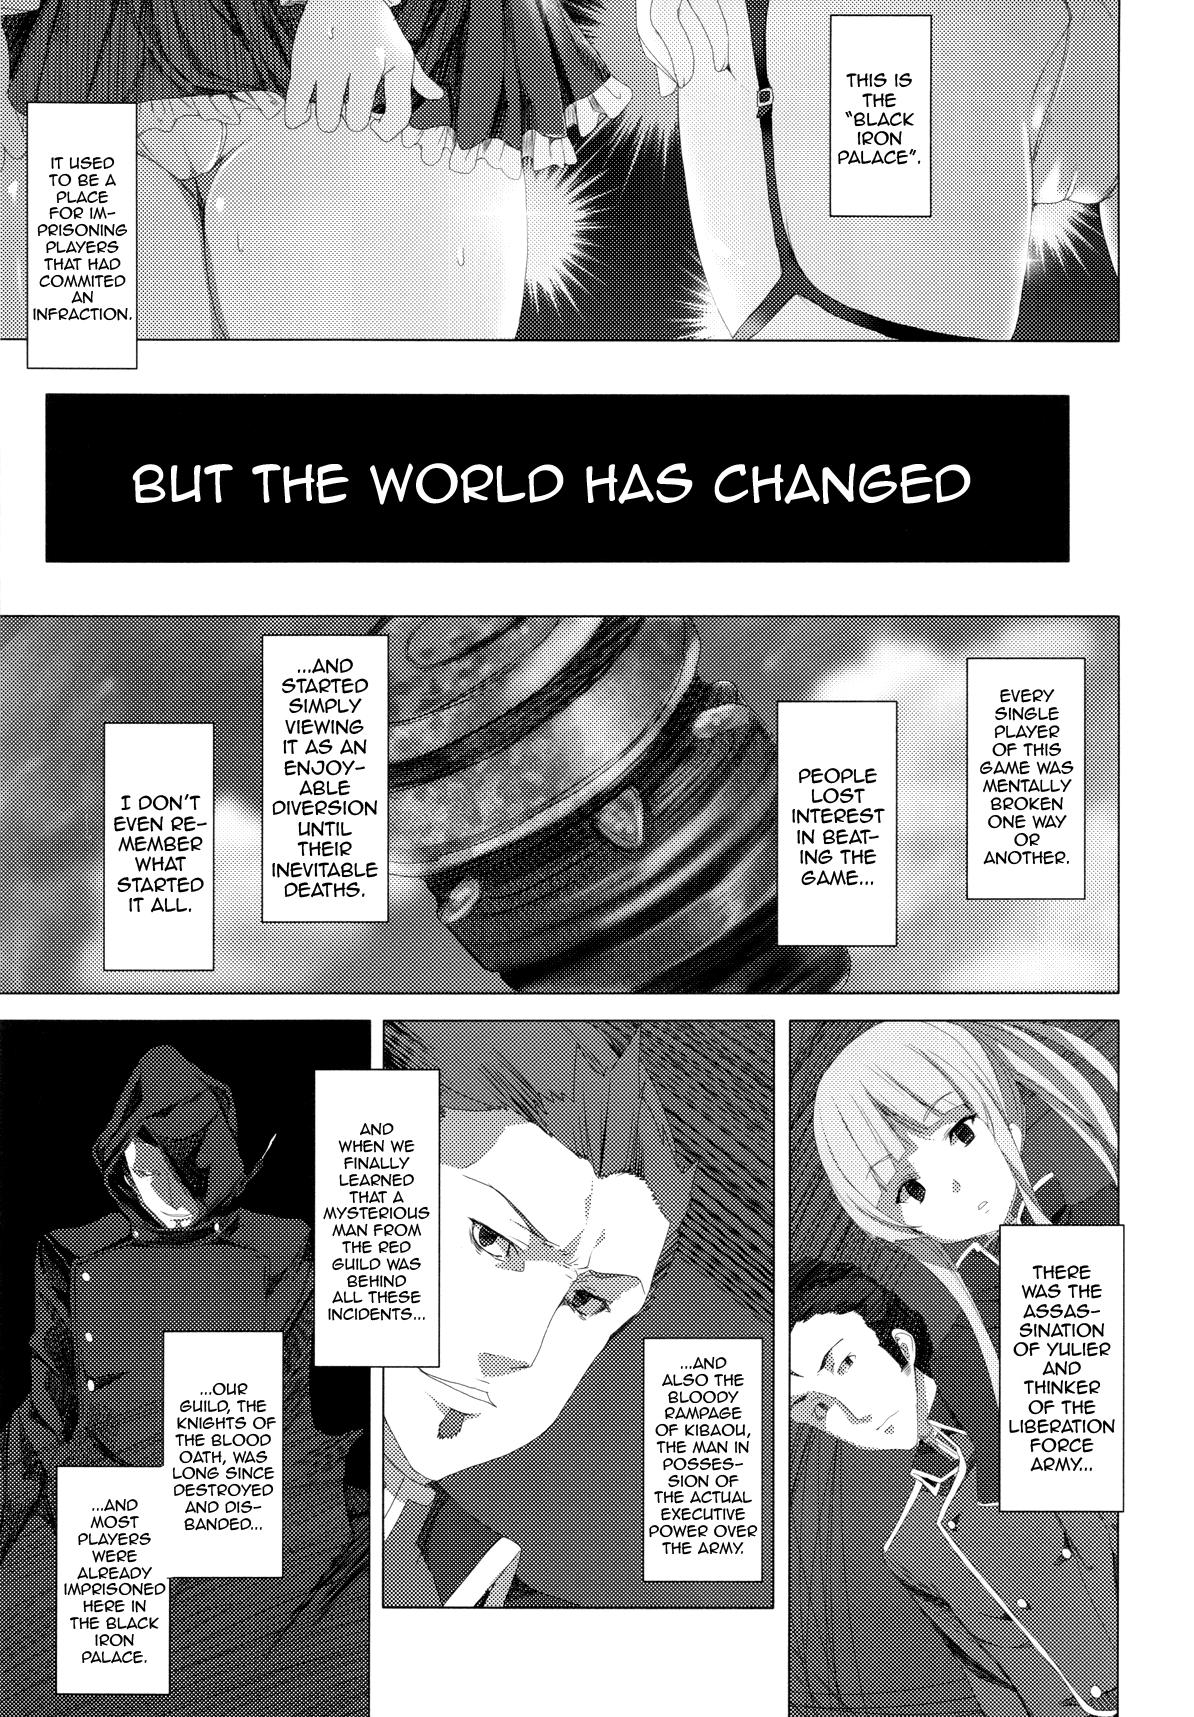 Topless WRONG WORLD - Sword art online Throat - Page 7